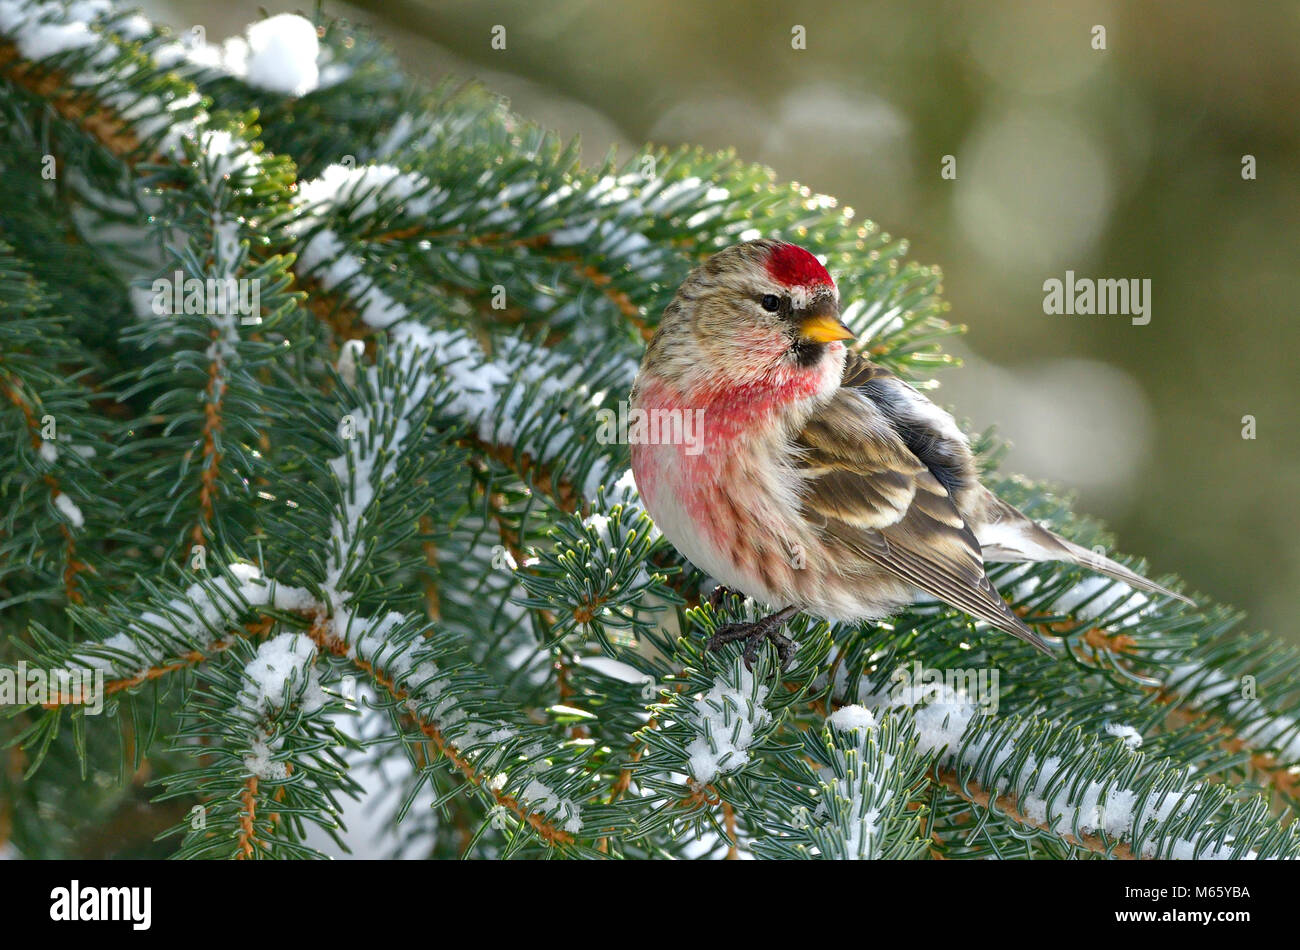 A wild Redpoll finch bird (Carduelis flammea) perched on a spruch tree branch with fresh fallen snow in rural Alberta Canada. Stock Photo